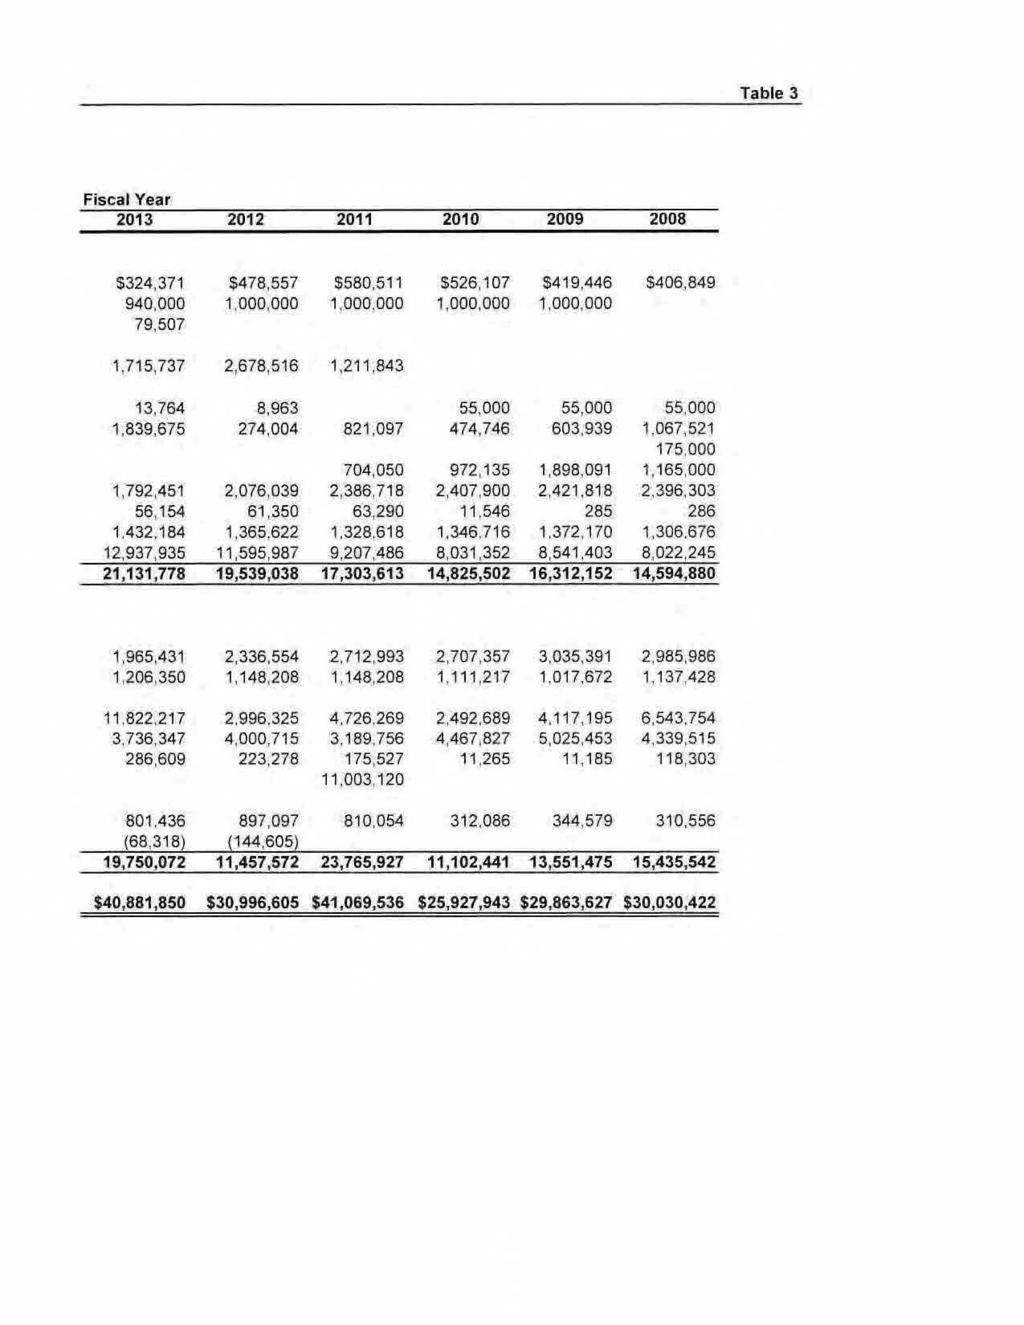 Table 3 Fiscal Year 201 3 2012.201.1 2010 2.009 2008 $324,371 $4.78.-557 $580,511 $526,107 $419,446 $406.849 940,000 1,0001000 1,000,000 1,000,000 t,000,000 79,507 1,71.